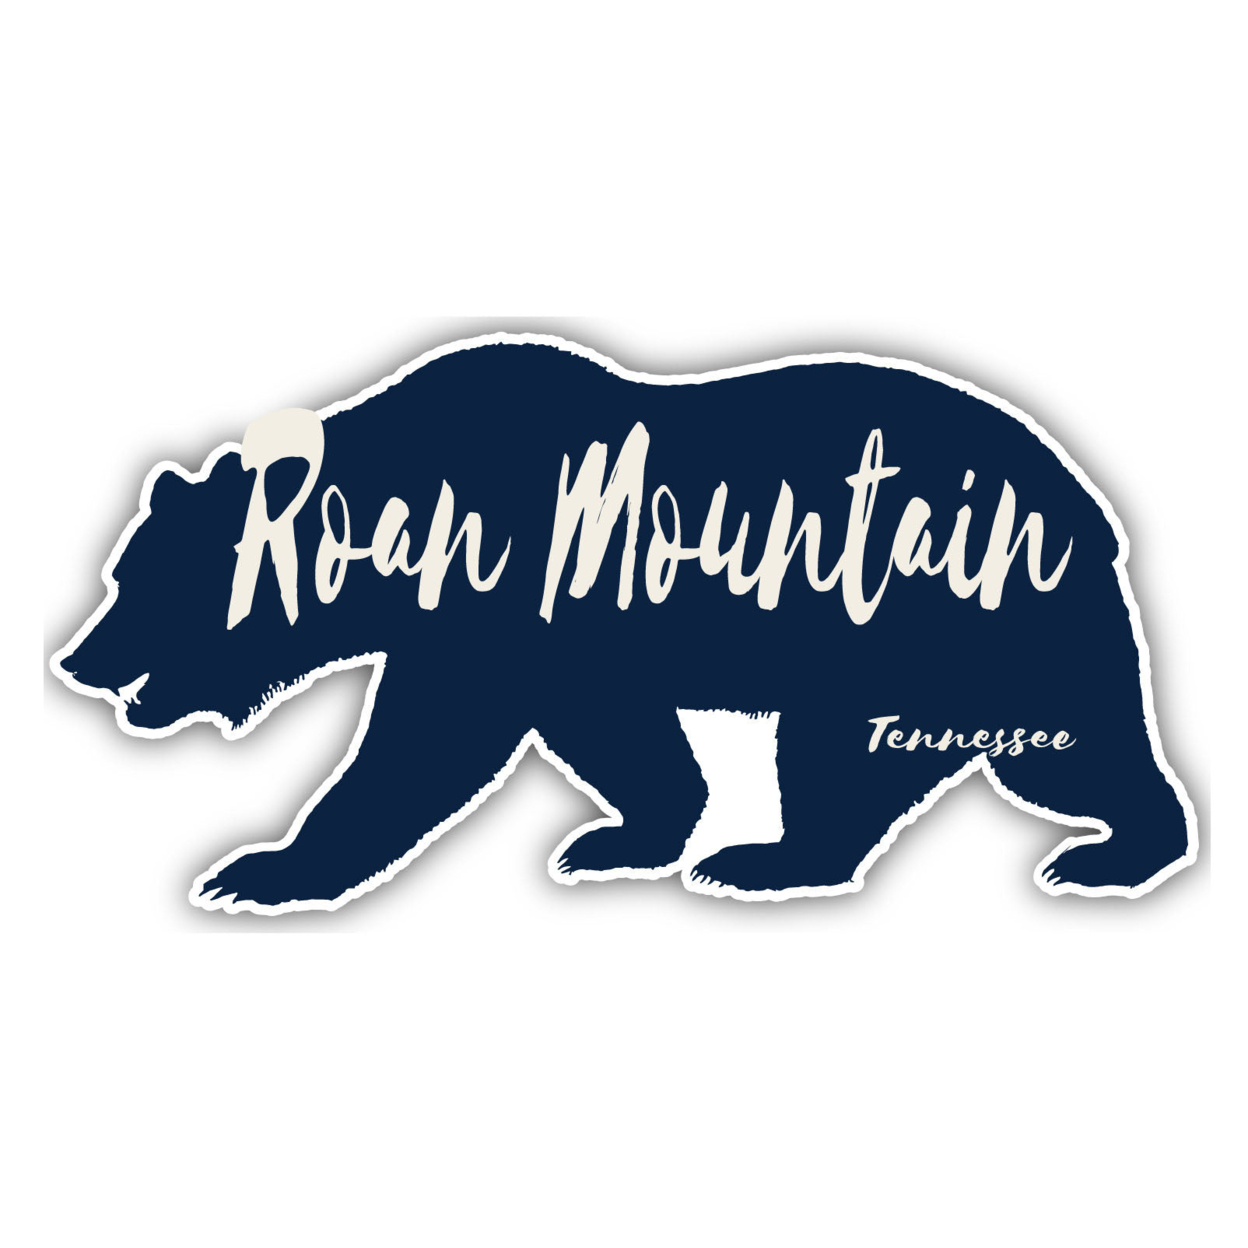 Roan Mountain Tennessee Souvenir Decorative Stickers (Choose Theme And Size) - Single Unit, 4-Inch, Camp Life